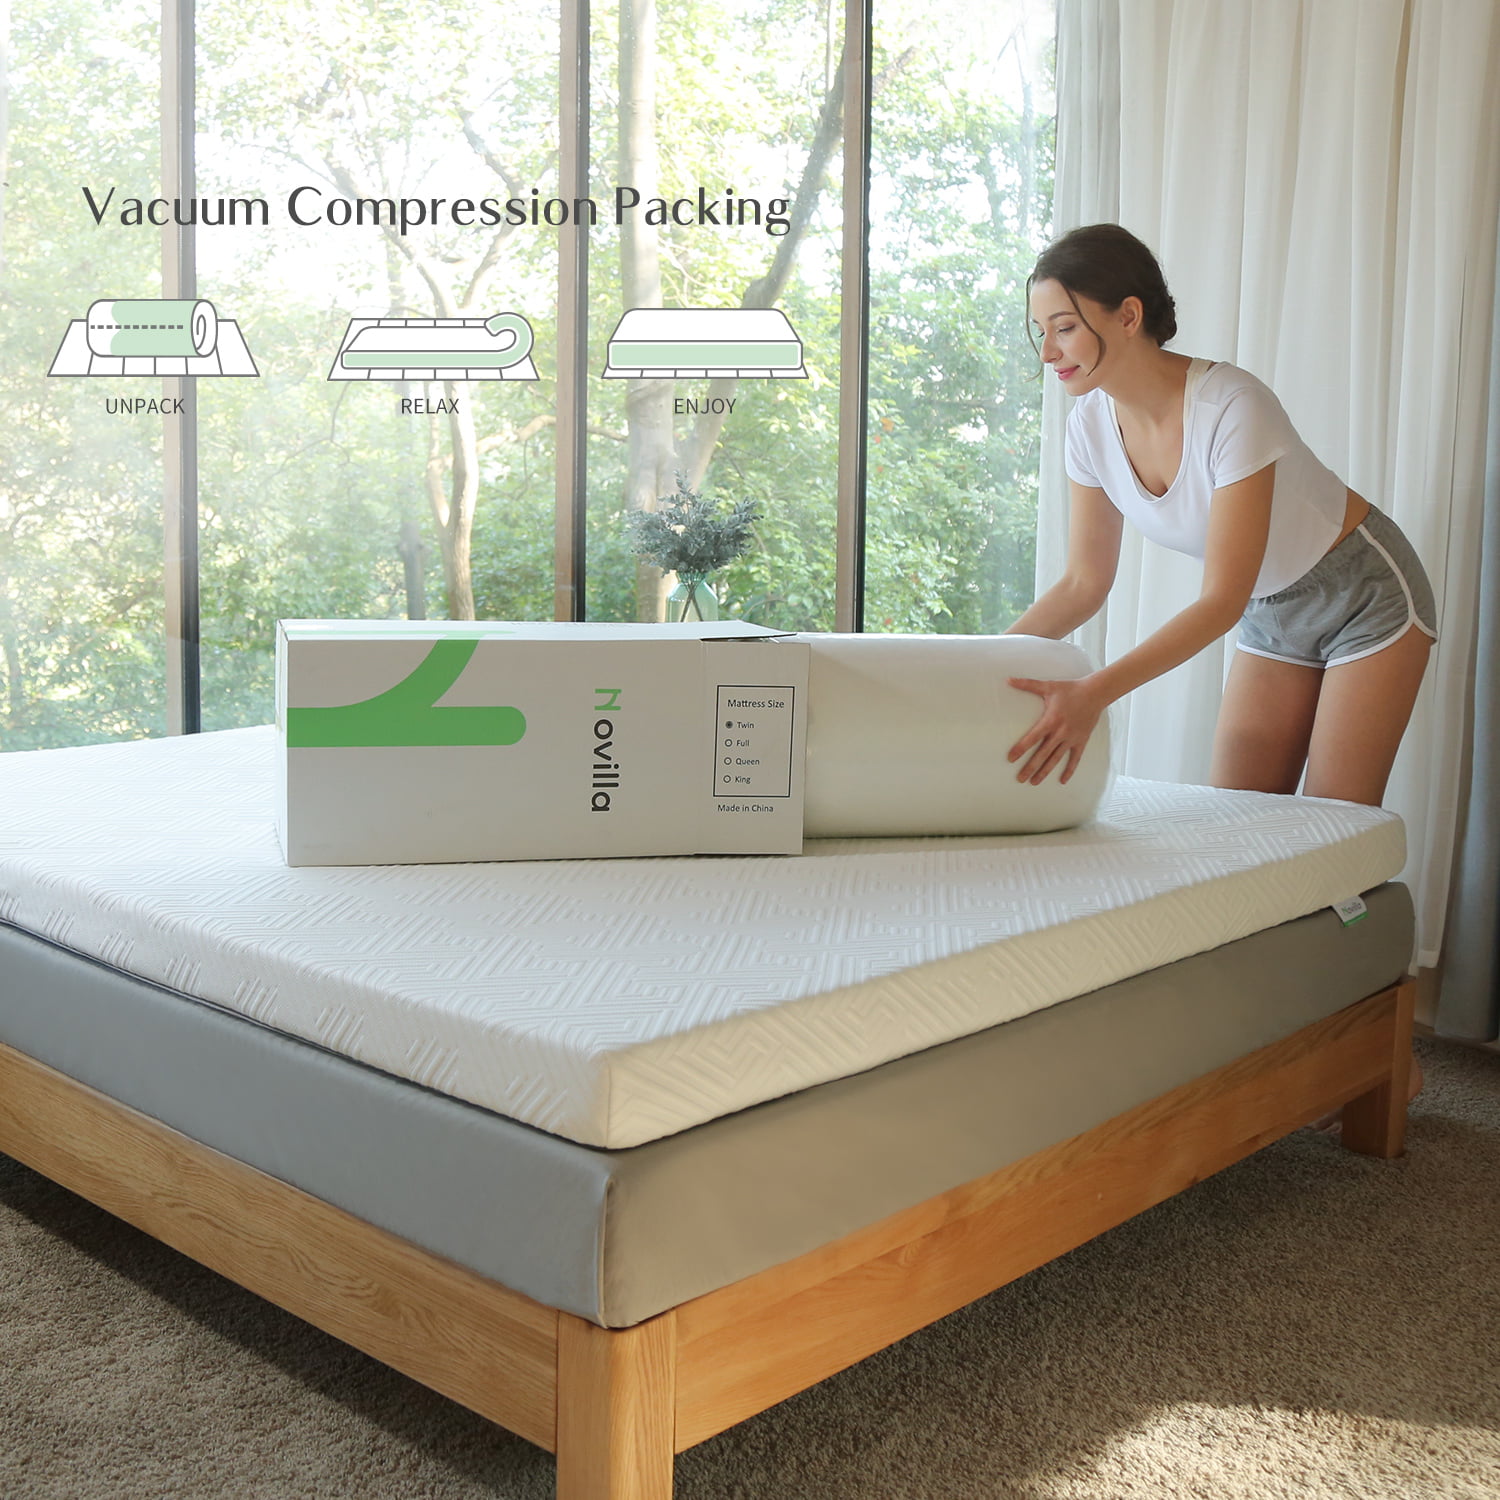 Novilla Full Size Mattress Topper Supportive & Pressure Relieving 3 Inch Dual Layer Memory Foam Mattress Topper Enhance Cooling with Breathable Bamboo Cover,Full Size Yozora